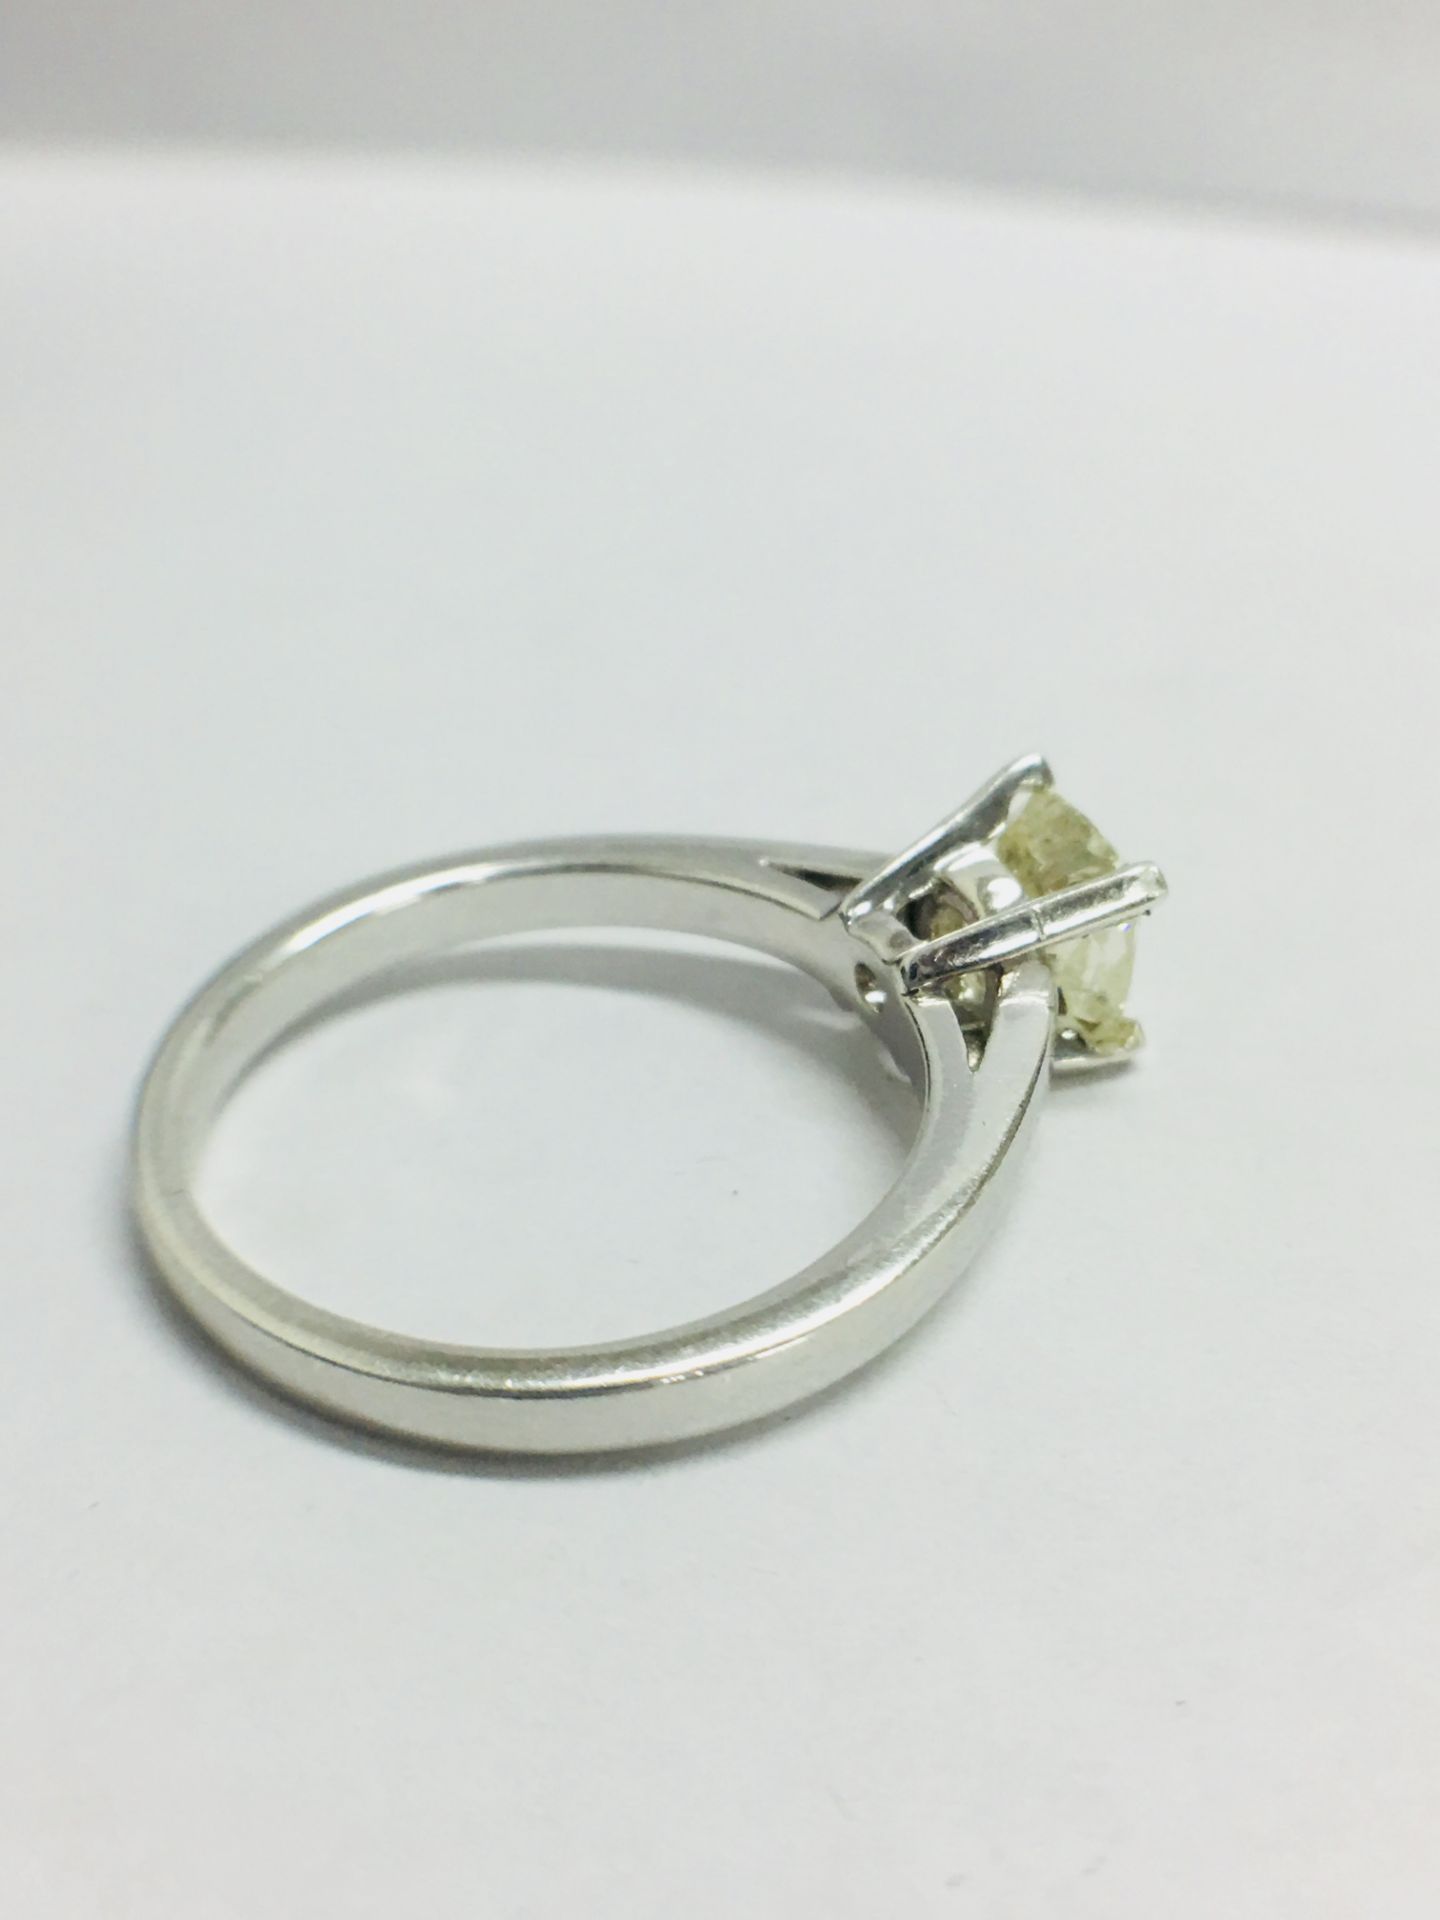 1.00ct diamond solitaire ring with a Cushion cut diamond. J colour and I1 clarity enhanced stone. - Image 6 of 7